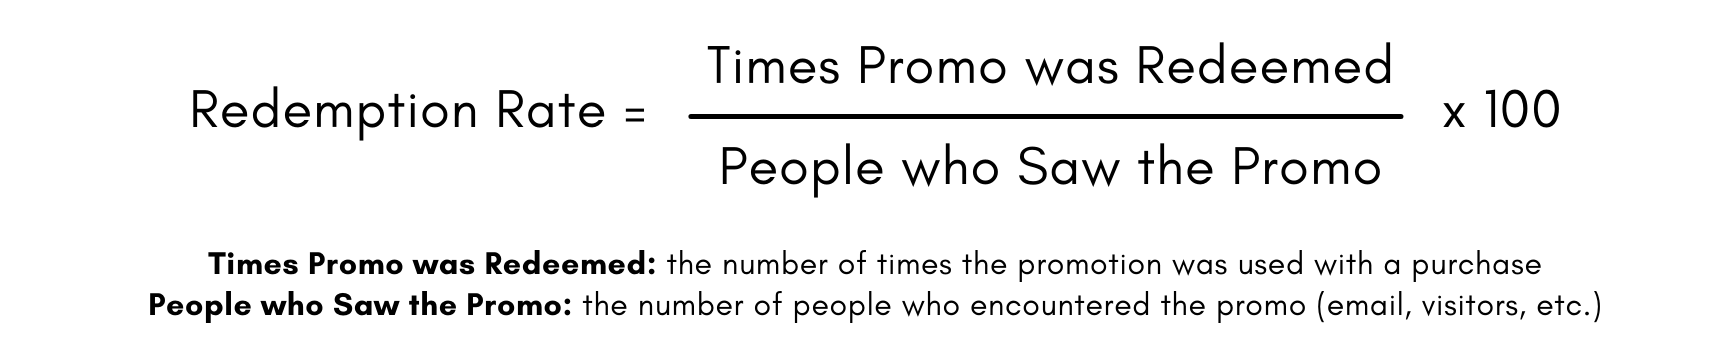 Formula for Redemption Rate: number of times the promo was redeemed divided by the number of people who saw the promo, times 100.